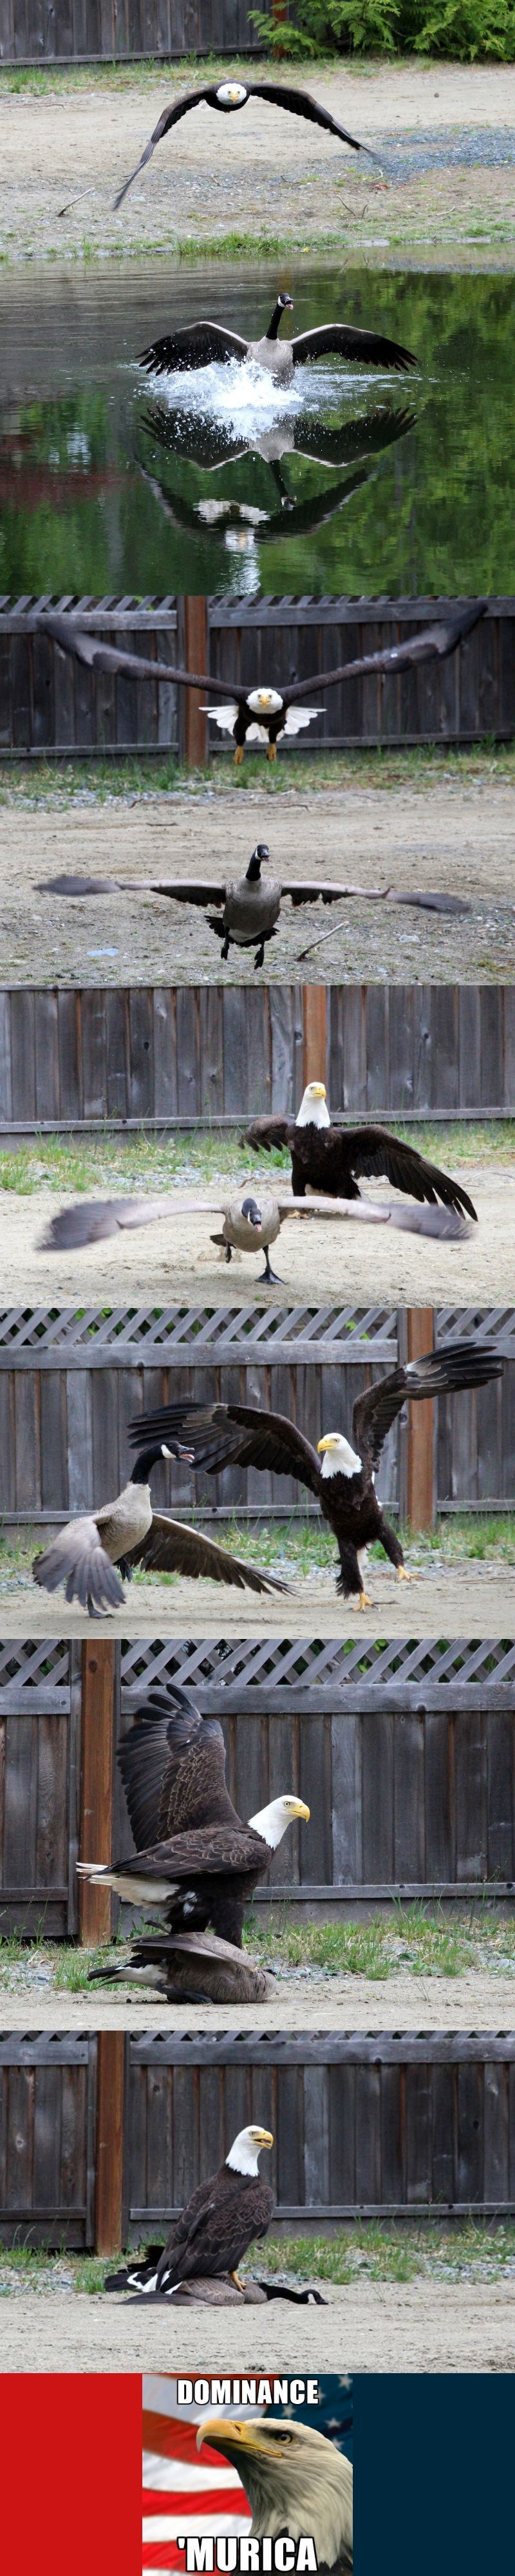 win bald eagle and canadian goose fight in real life